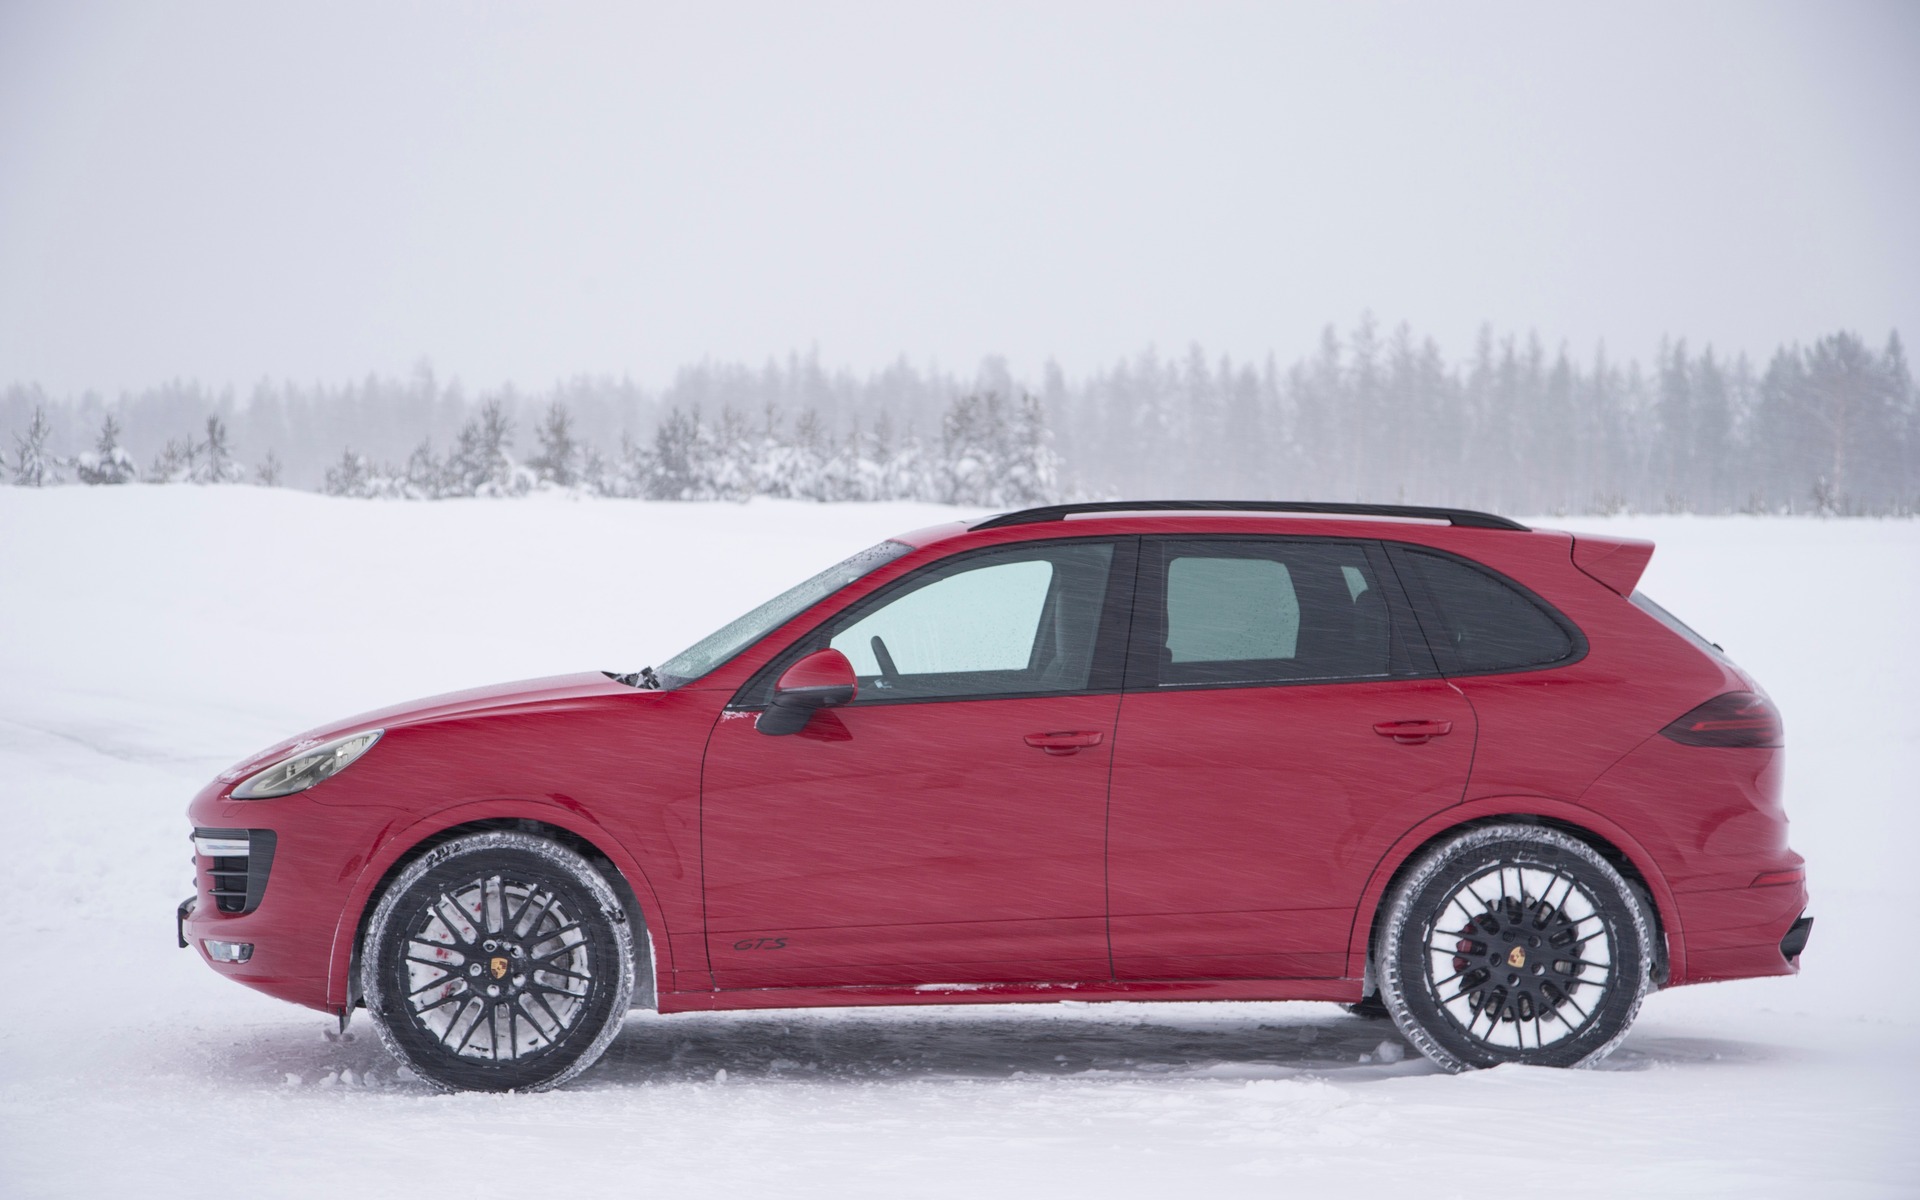 Black openwork rims loaded with snow.